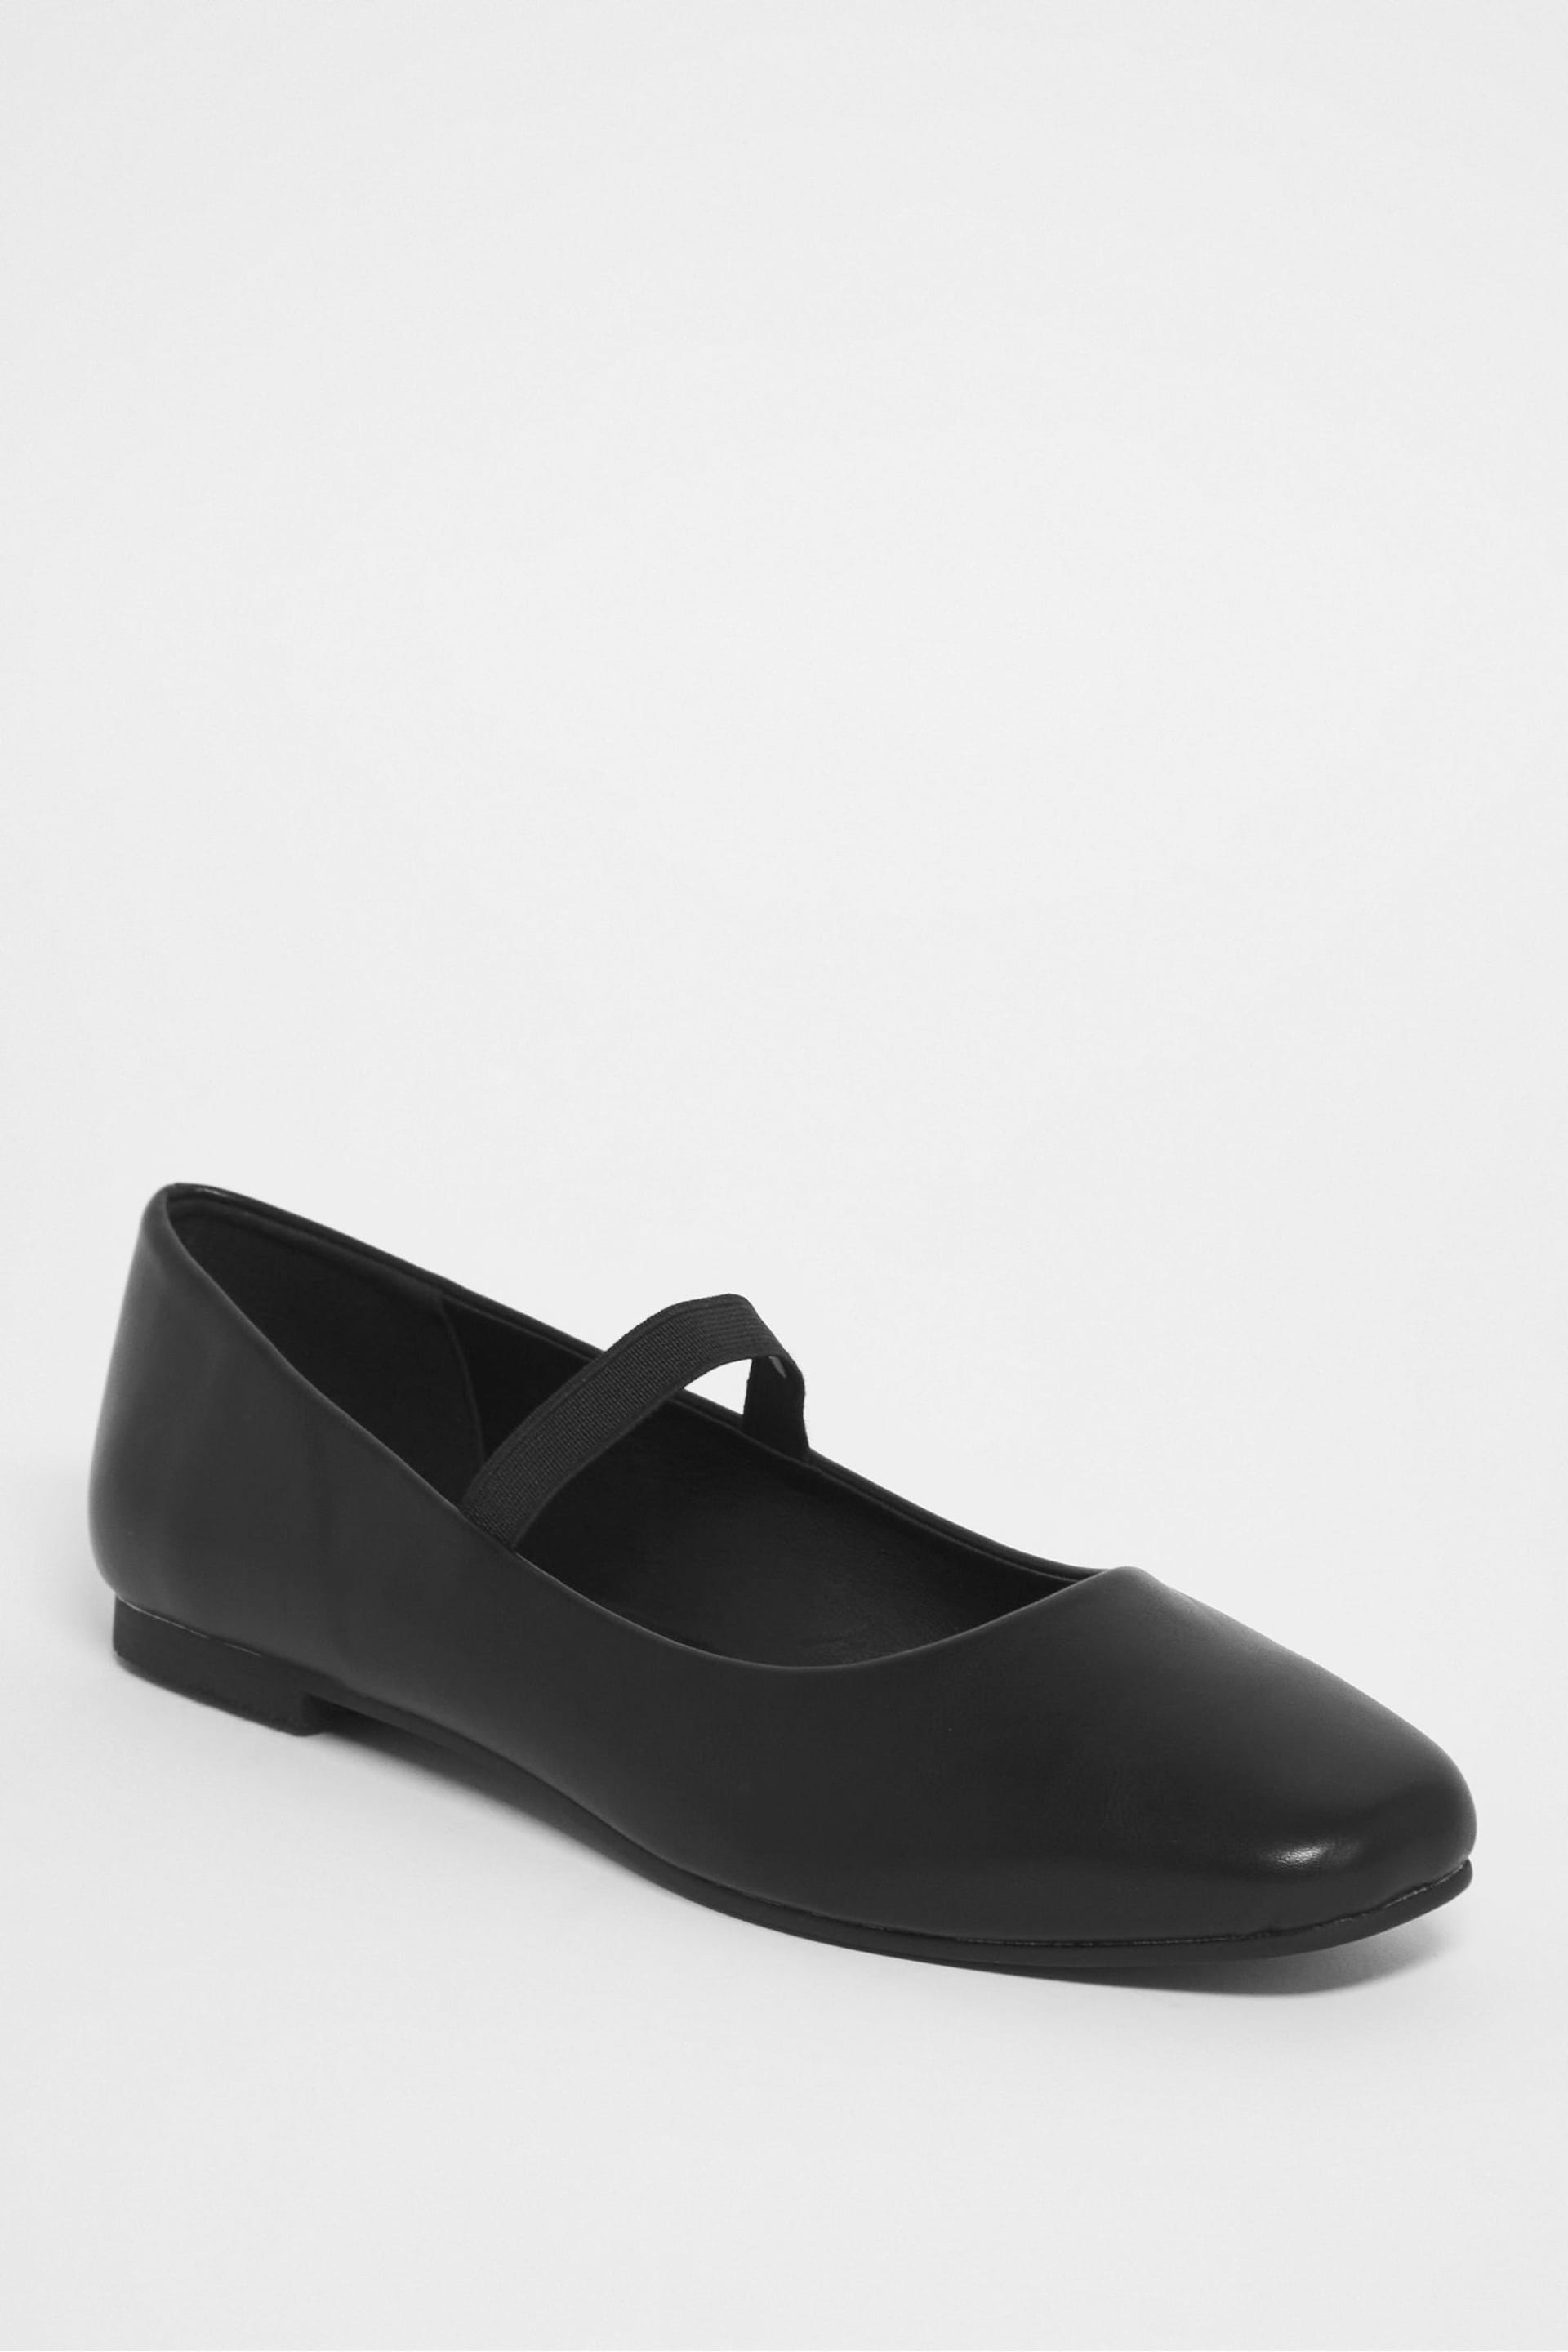 Simply Be Black Square Toe Eleanor Ballerinas in Extra Wide Fit - Image 3 of 4